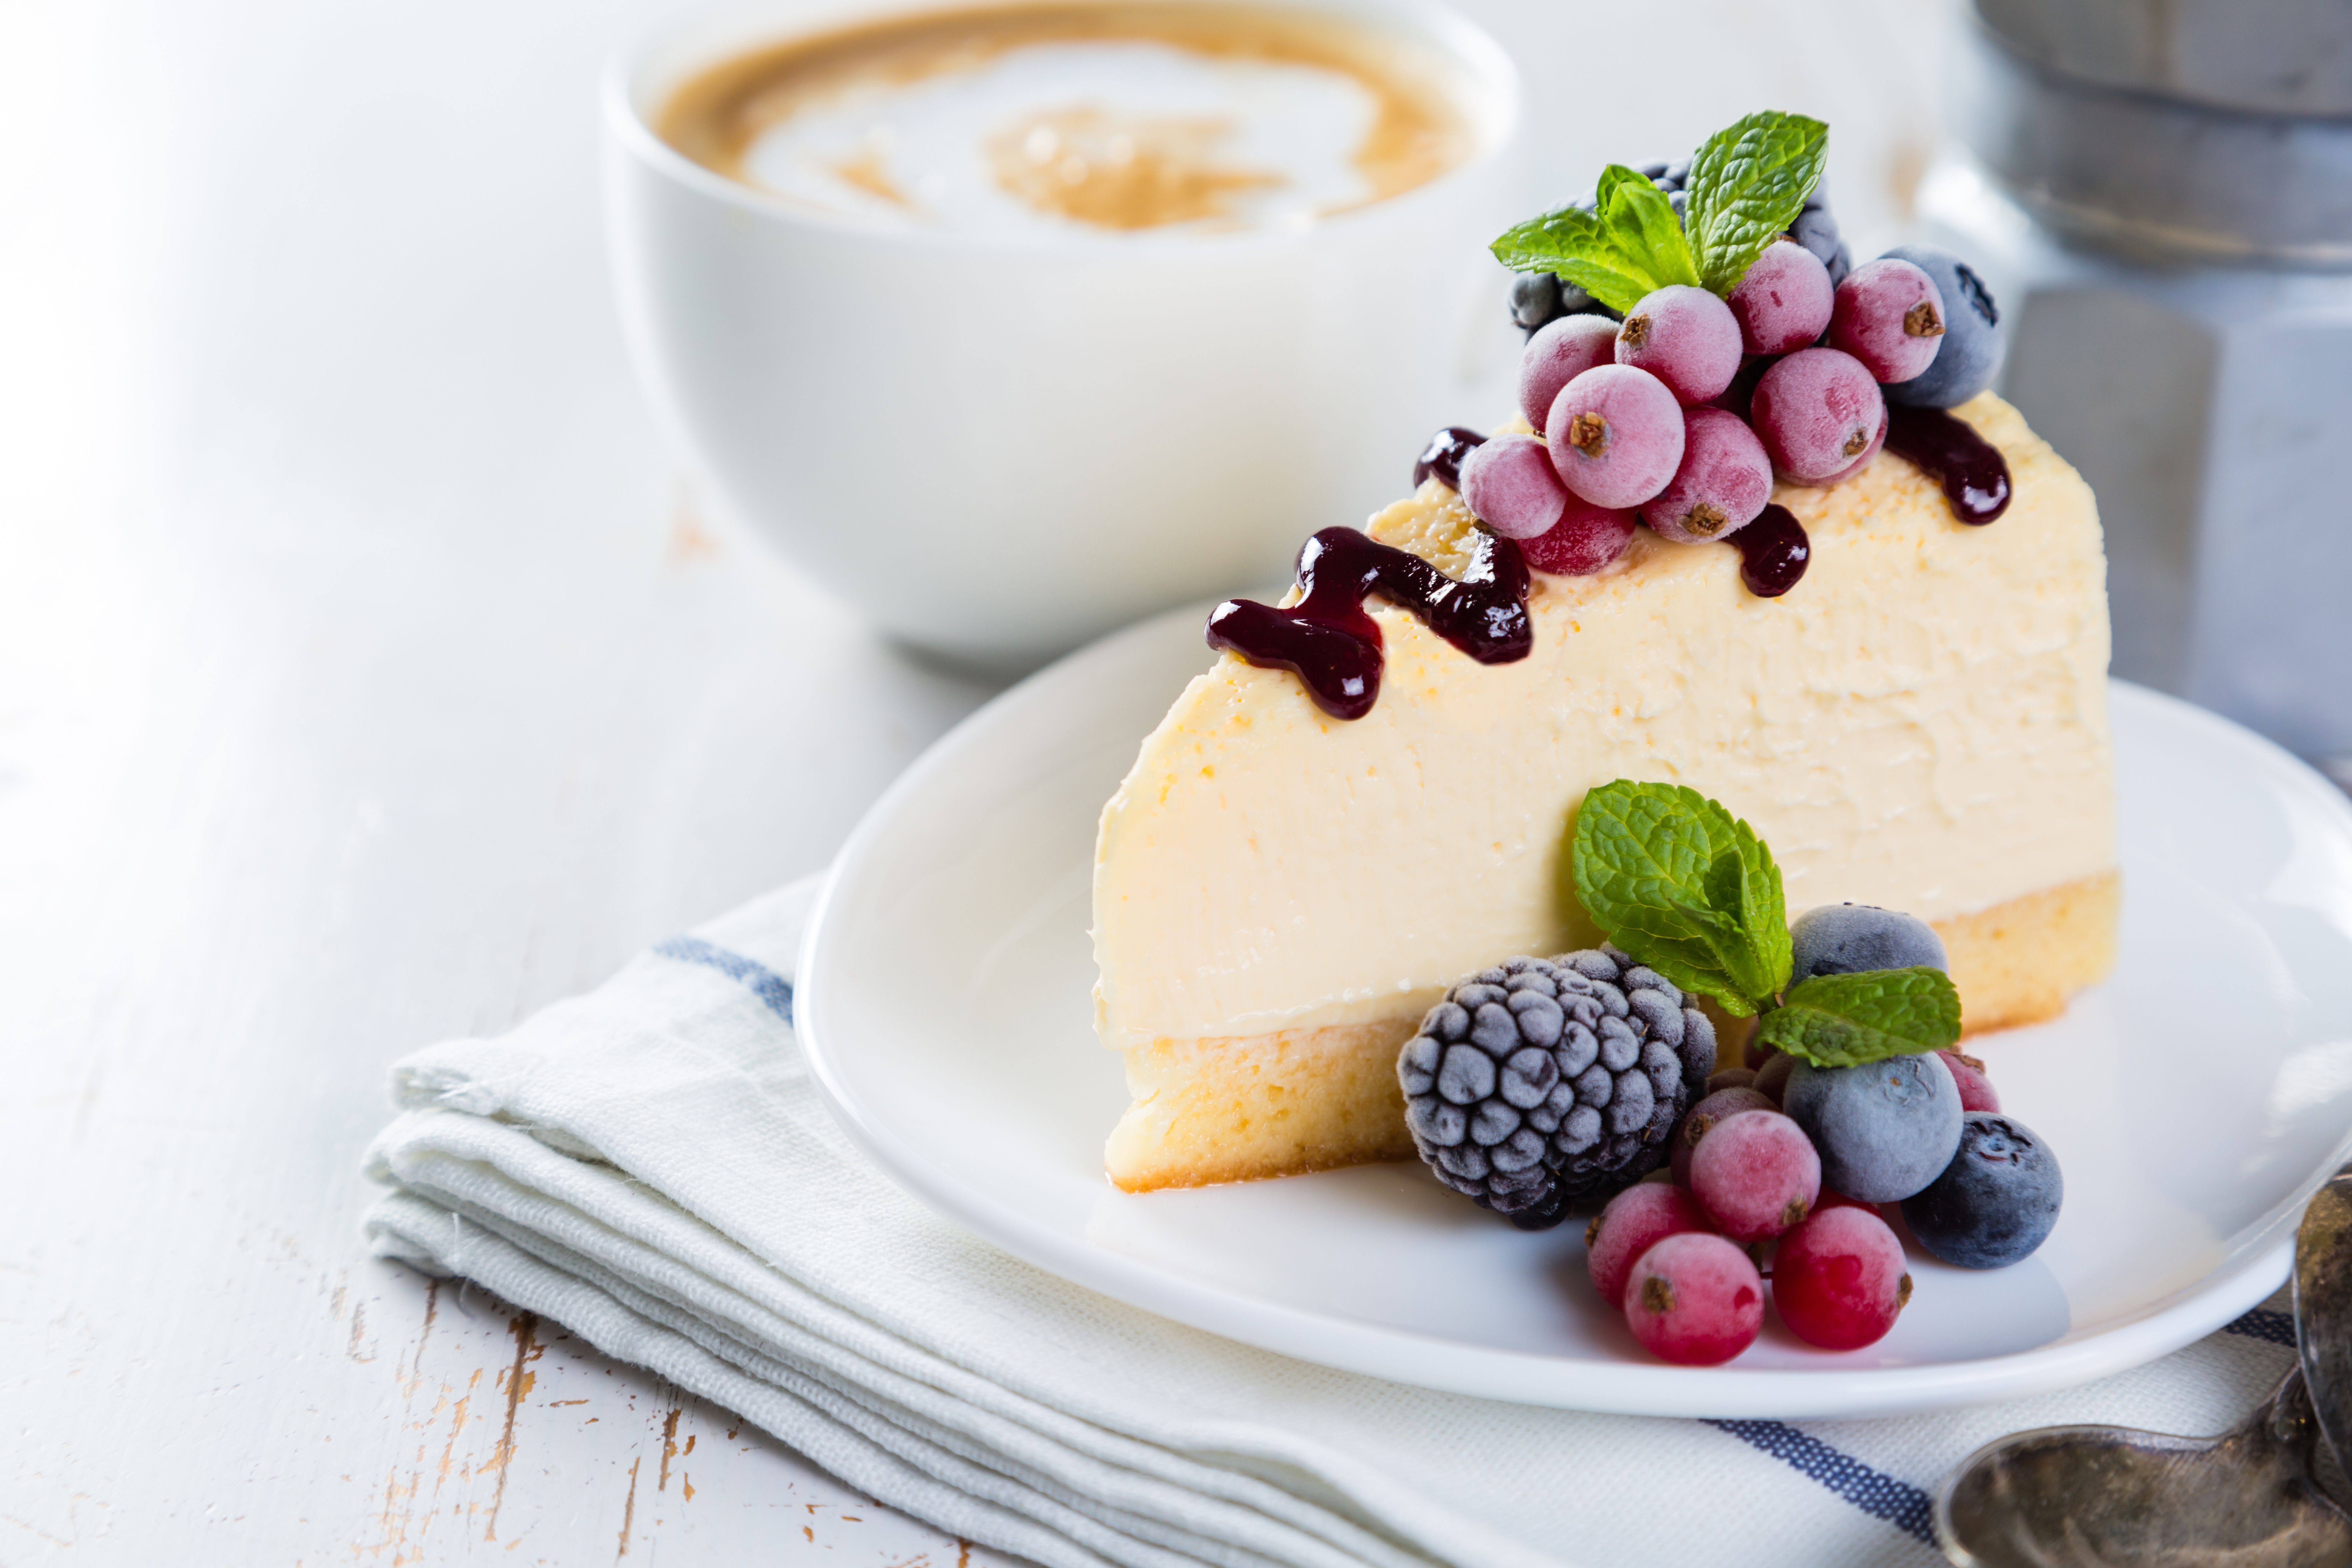 Cheesecake HD Wallpaper Background Image